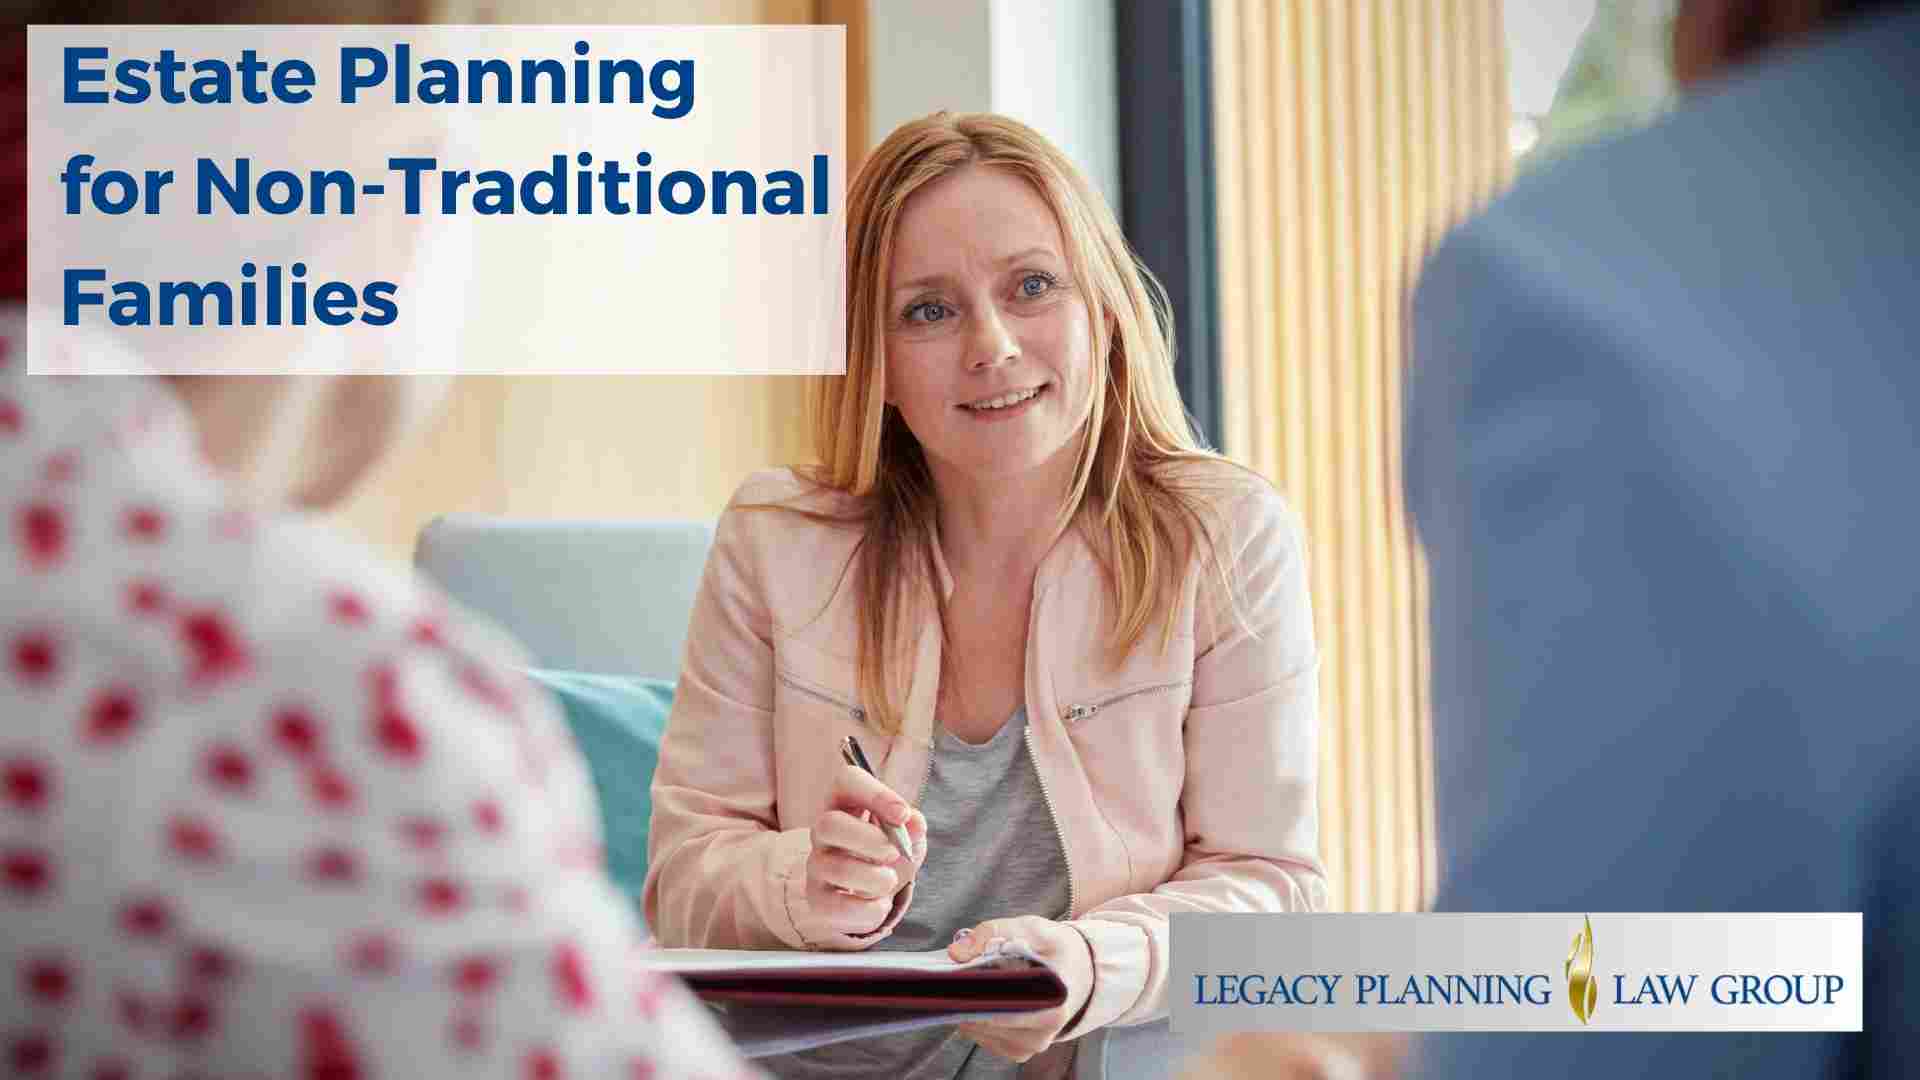 An advisor helping a couple do their Estate Planning for a Non-Traditional Family